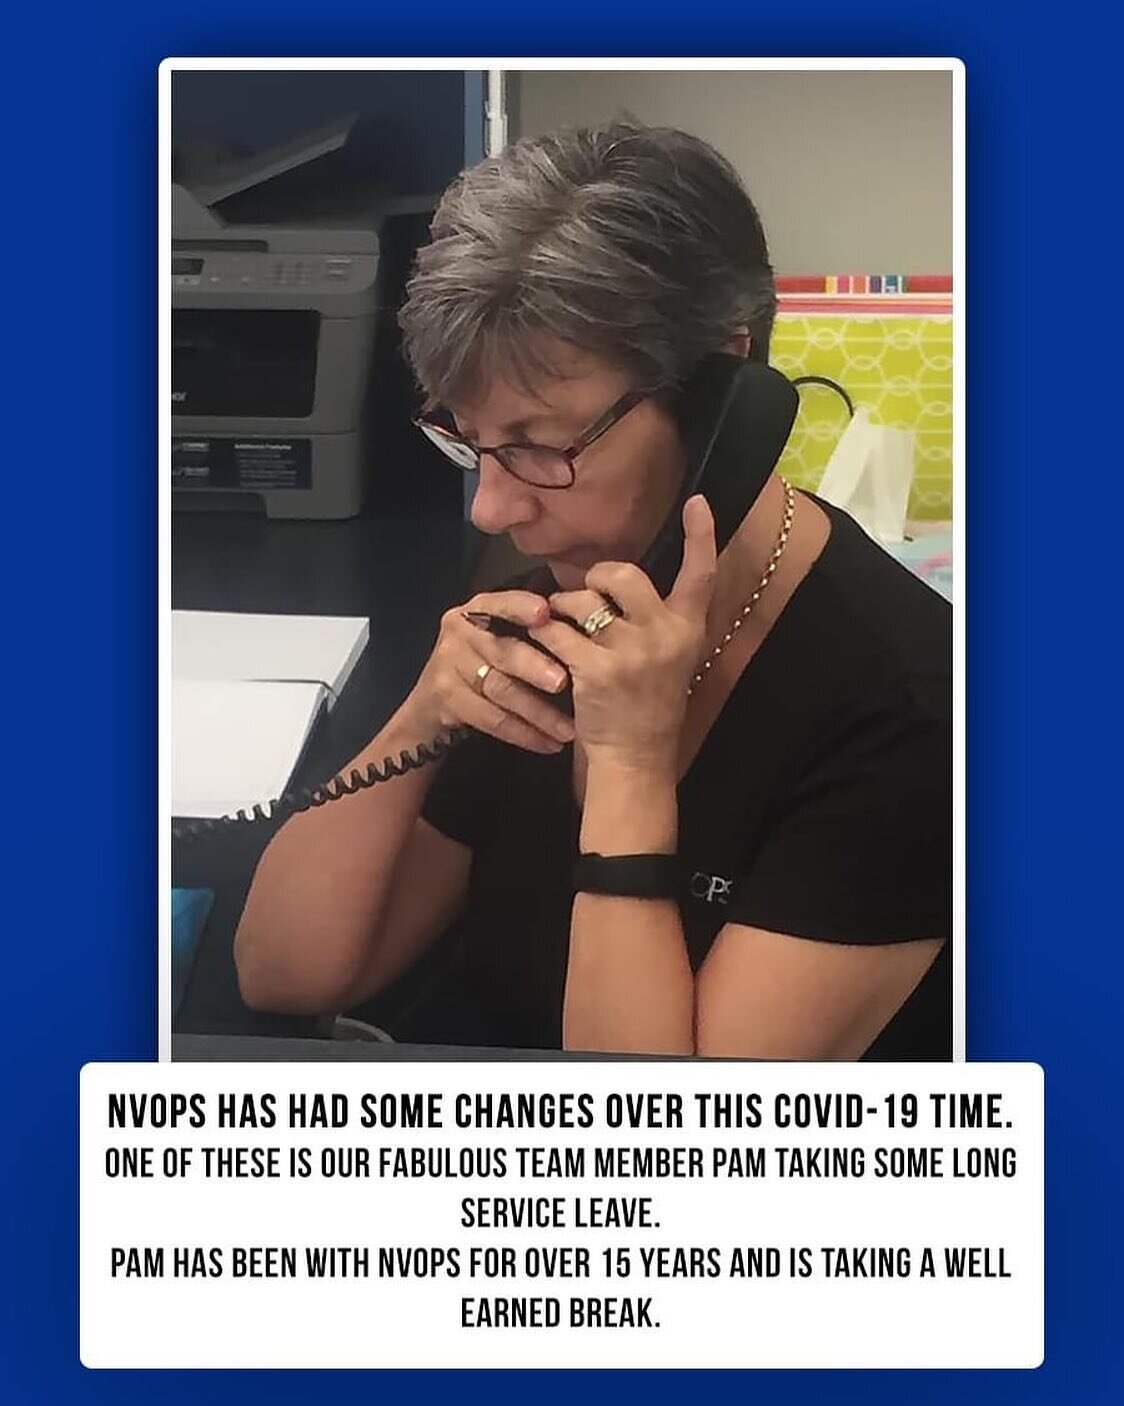 During COVID-19 there are lot of changes at NVOPS, one is that Pam is taking some long service leave. She'll be back, in the meantime you will hear someone else at the end of the phone...they might not 
recognize your voice over the phone
or know whe